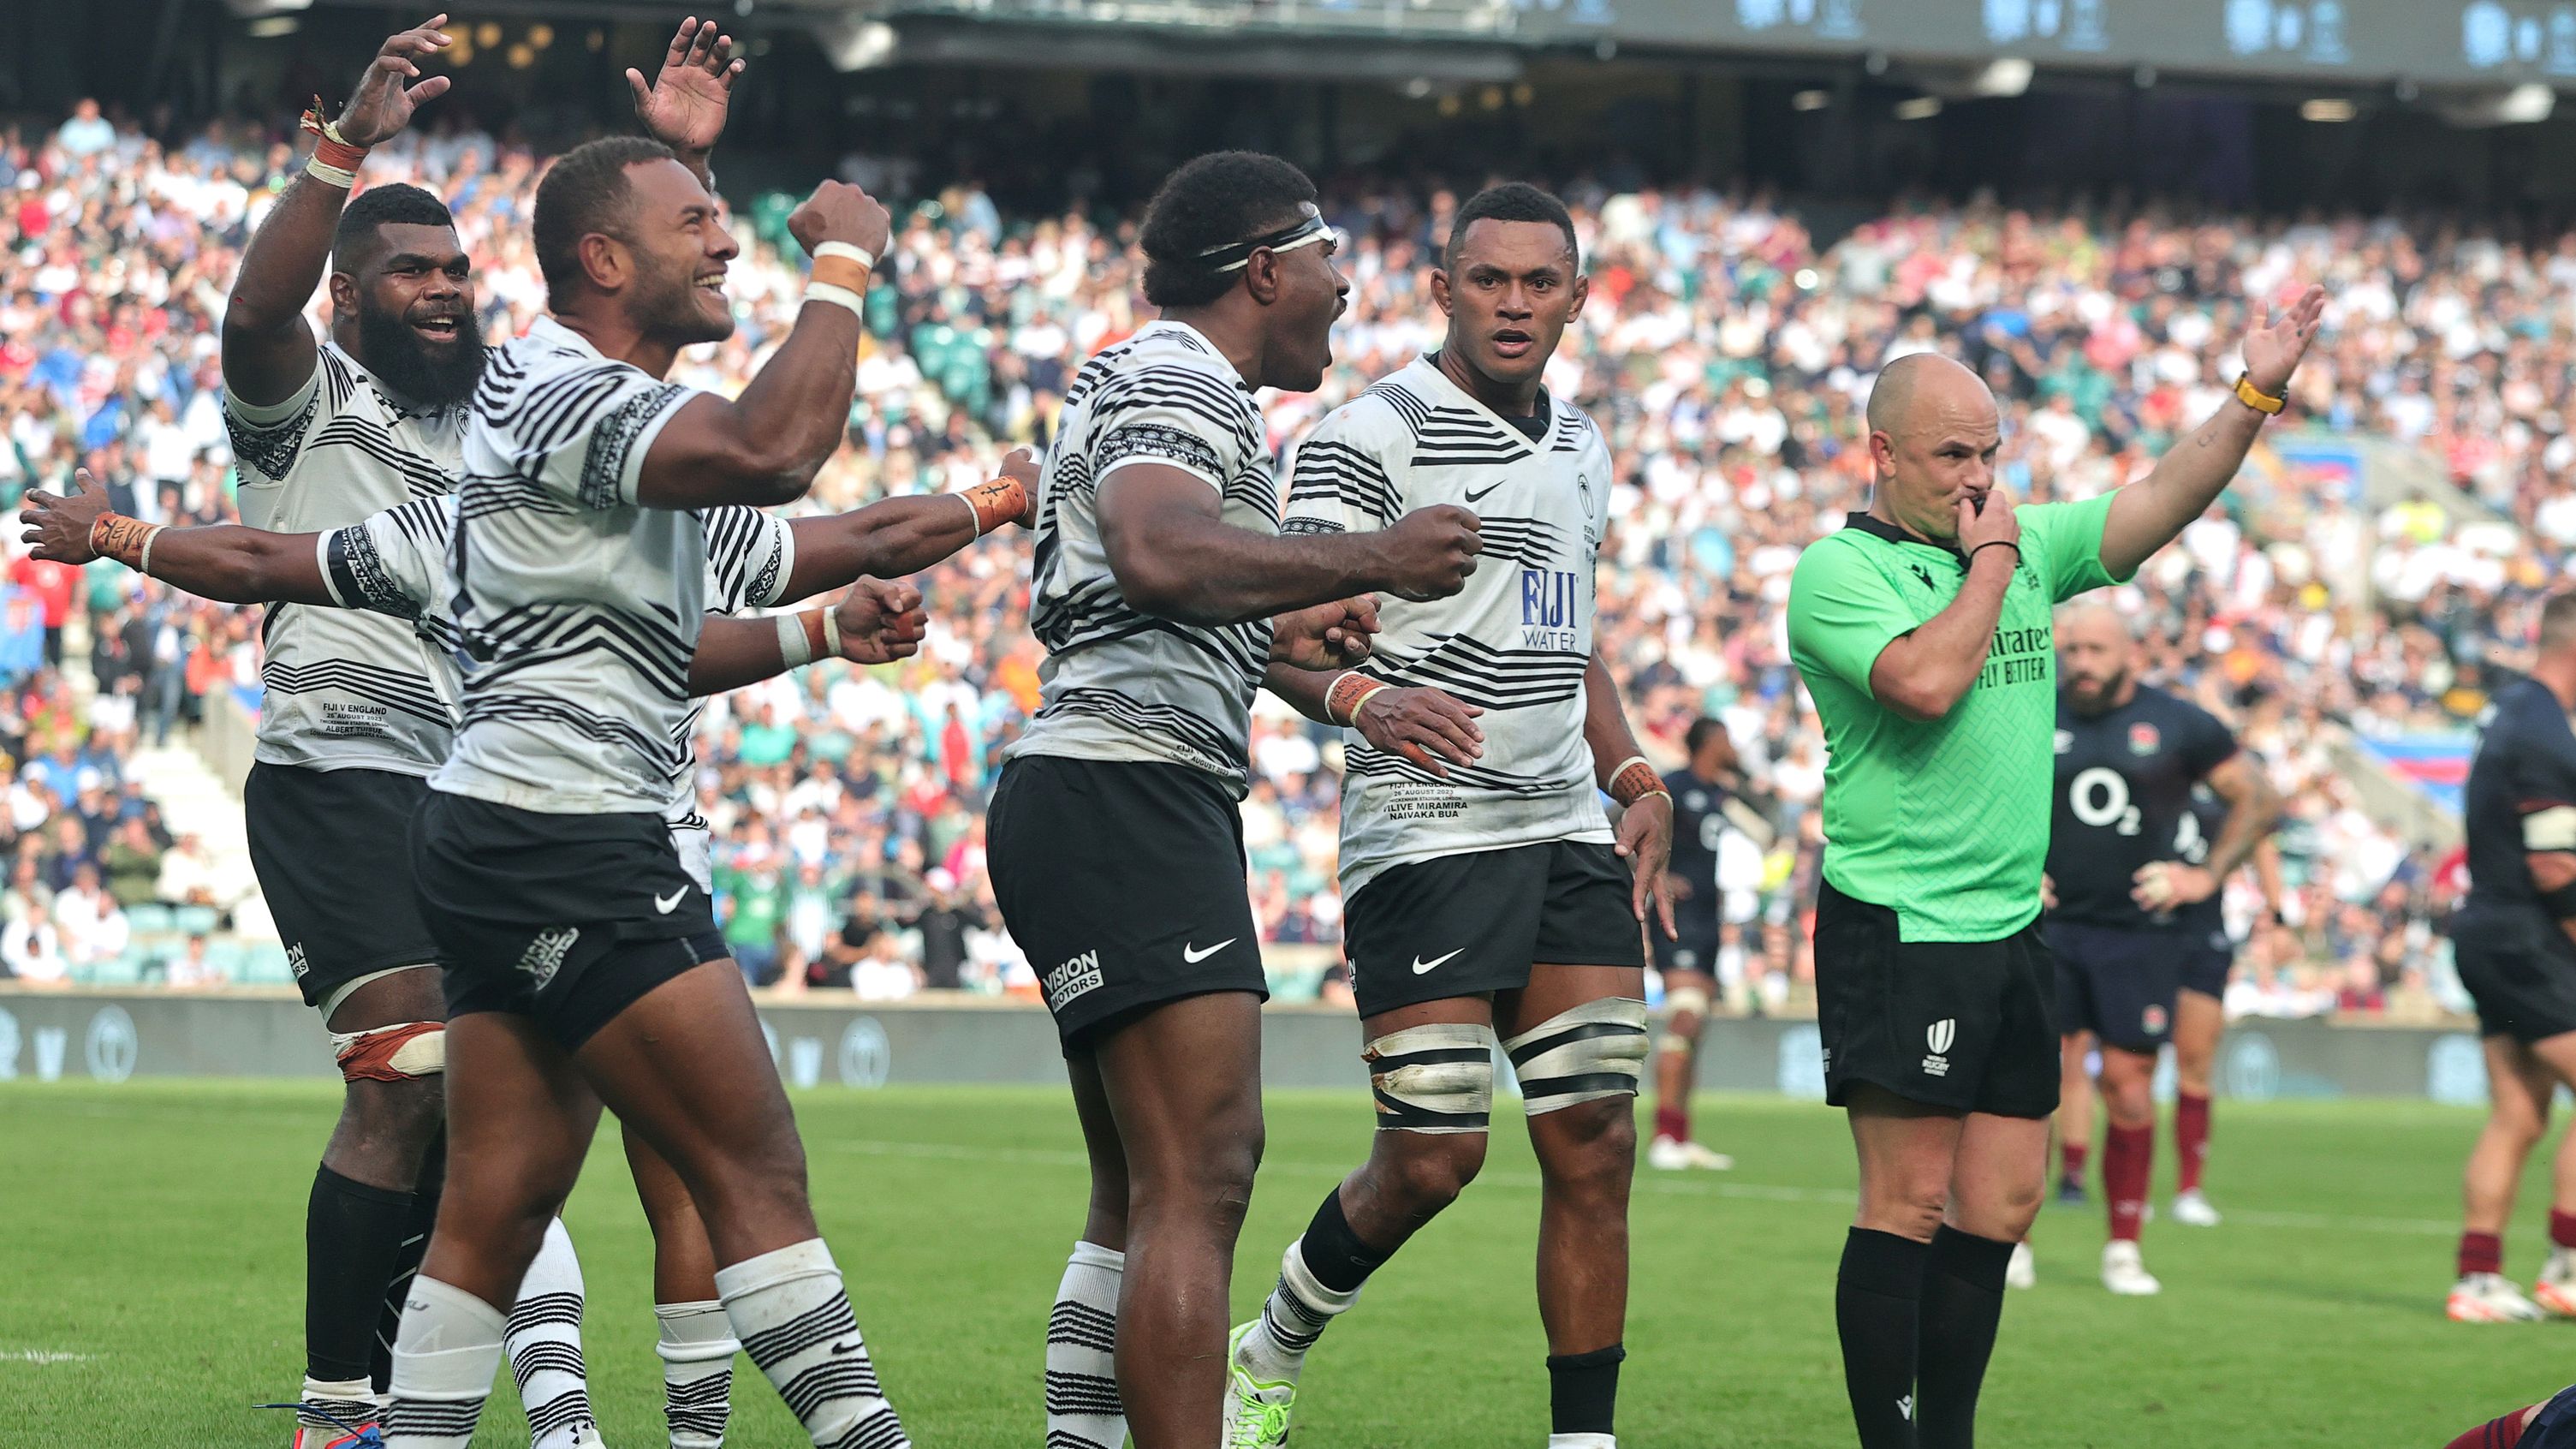 Fiji celebrate their historic victory over England.